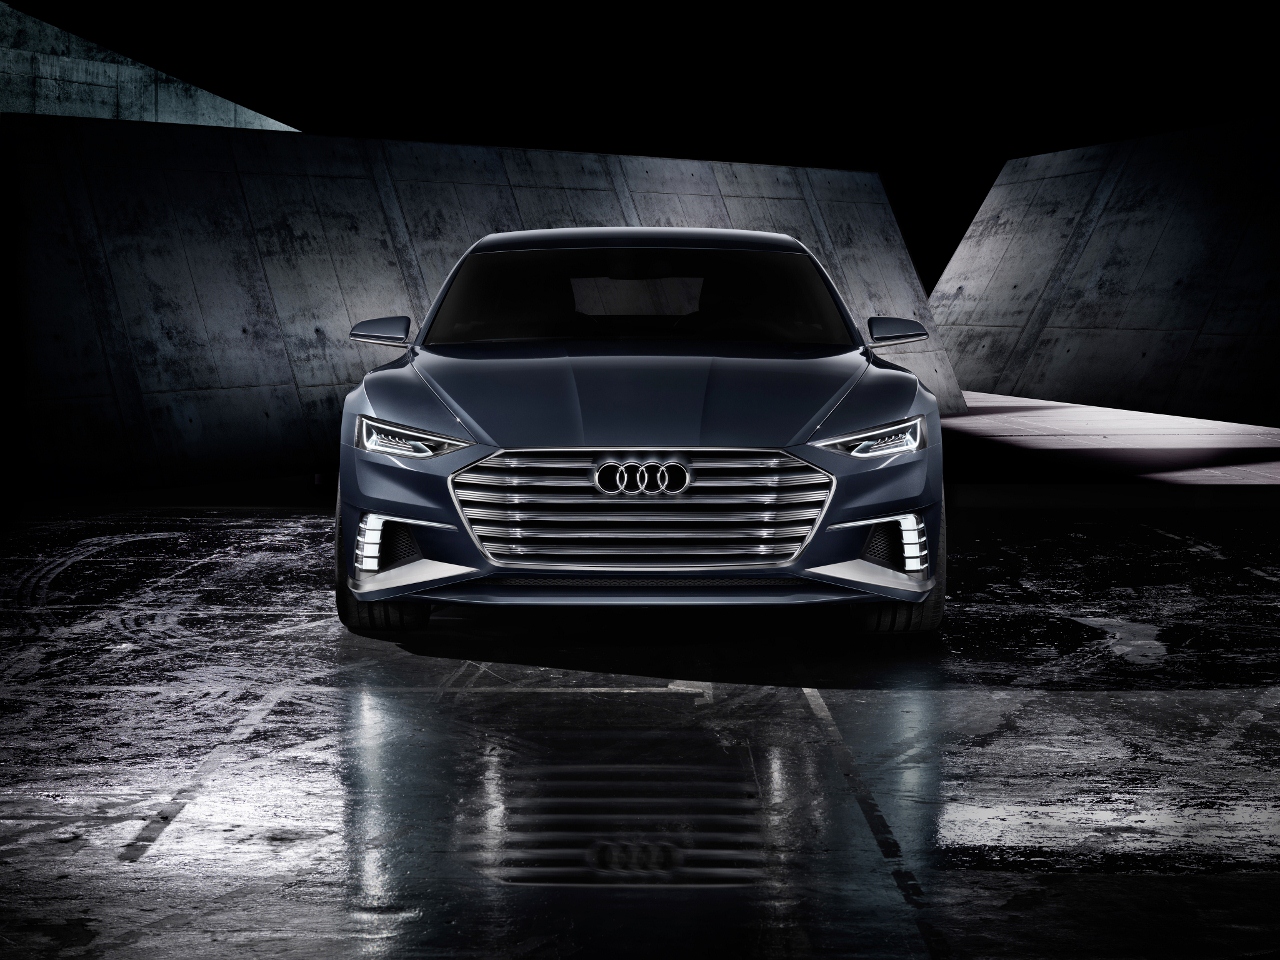 2018-audi-a8-aims-to-become-world-s-first-fully-autonomous-production-car-109463_1-1280x960-jpg.501677